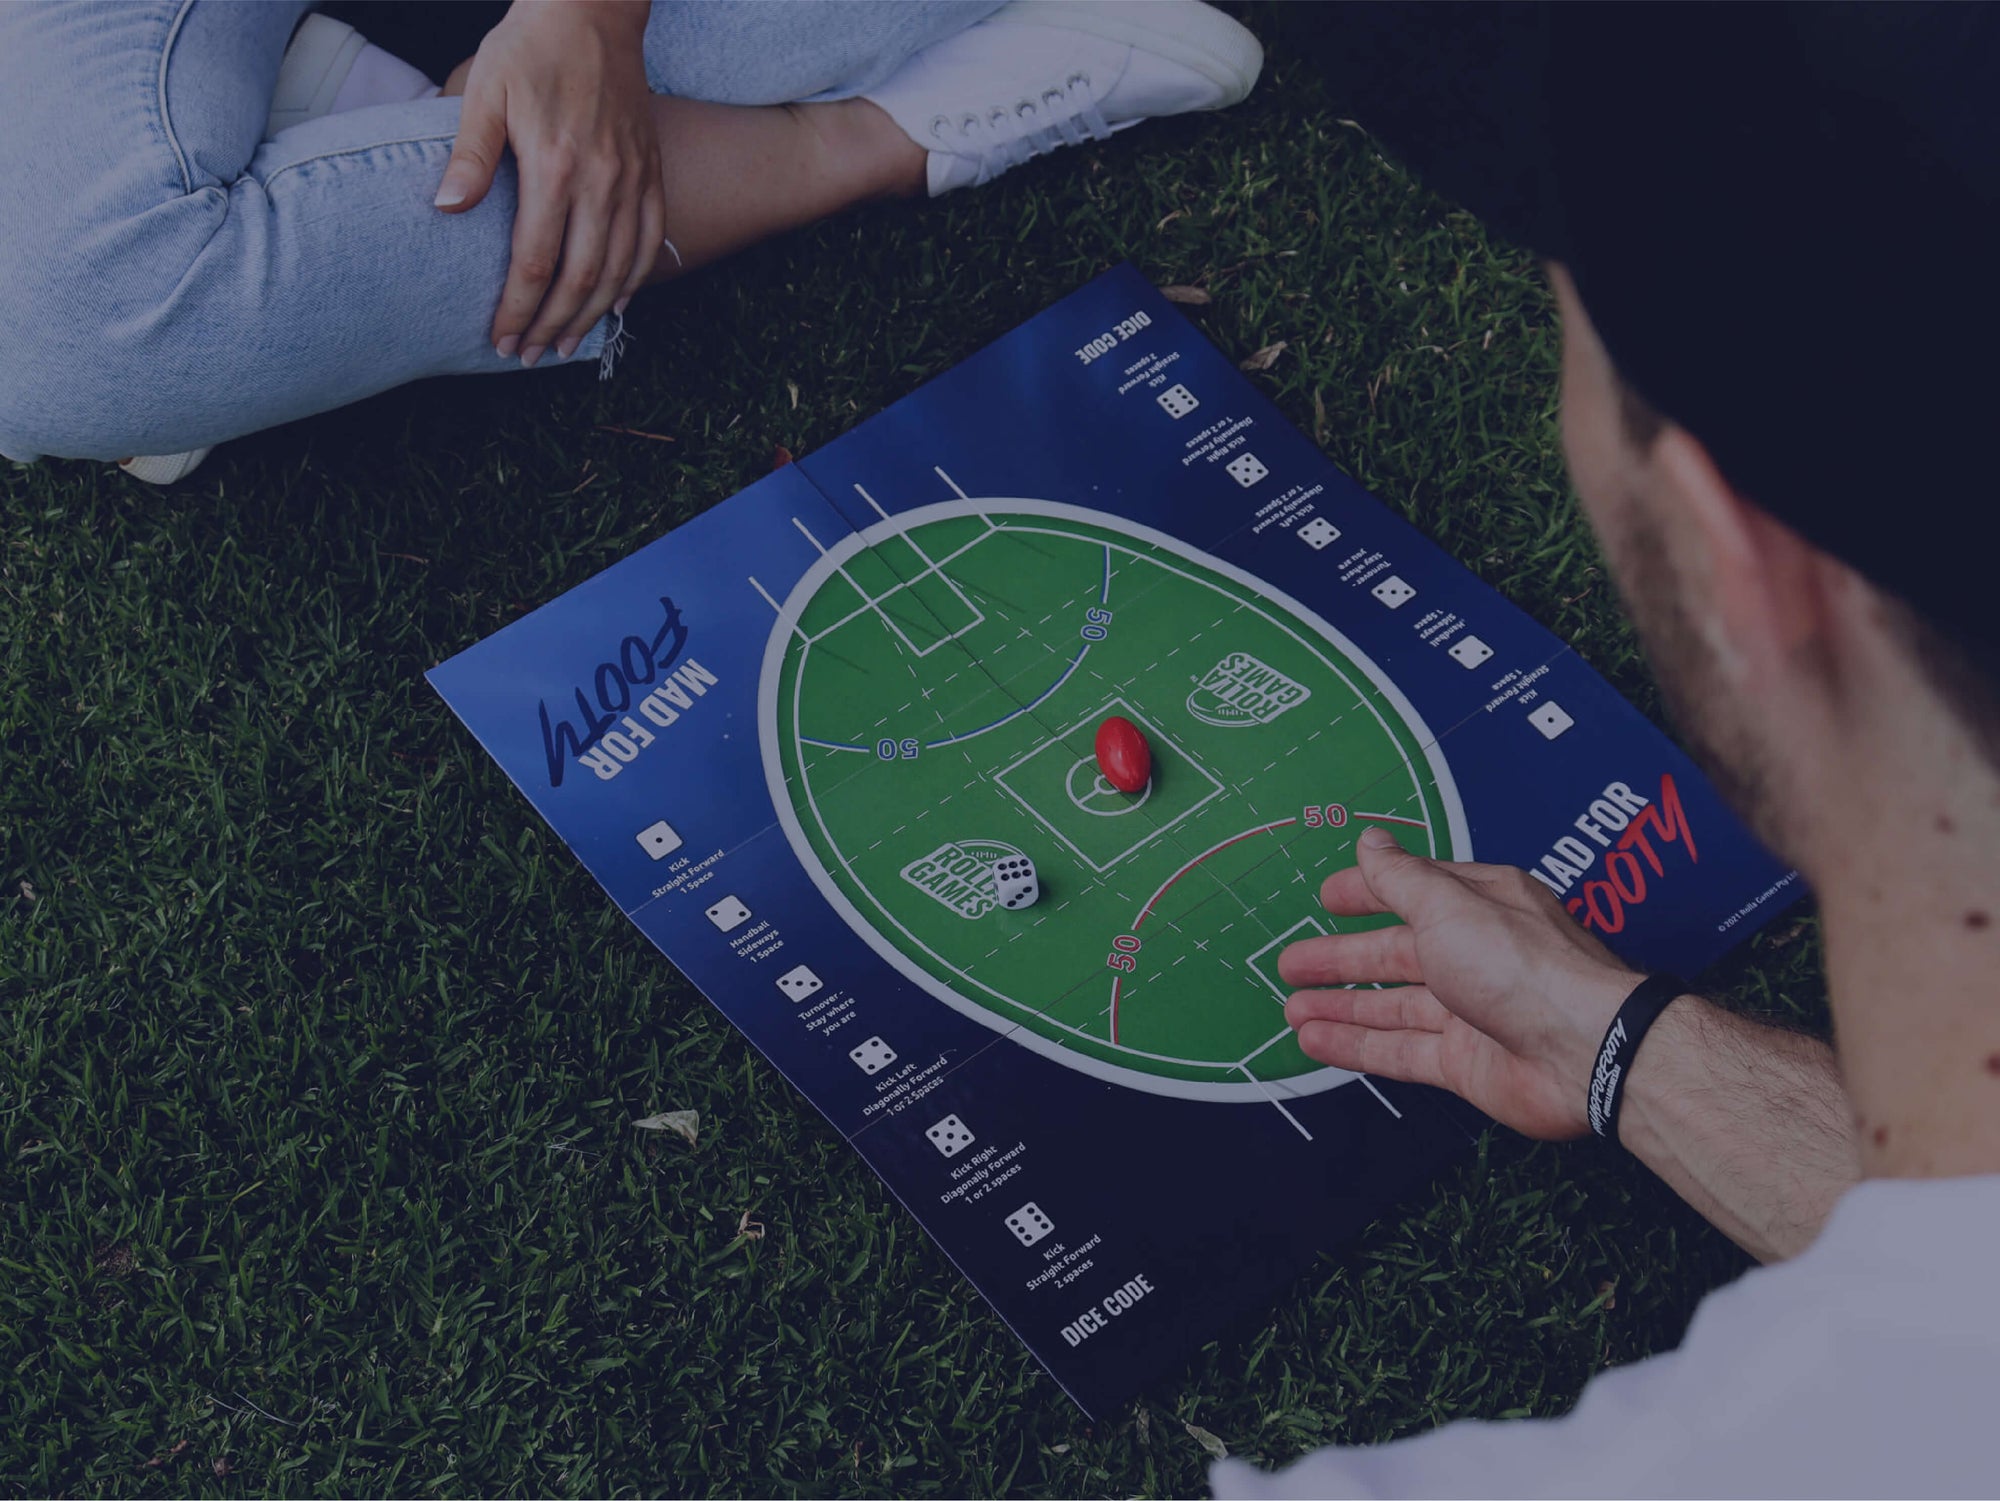 Rolling a dice and playing the Australian Rules Football Board Game on the grass.